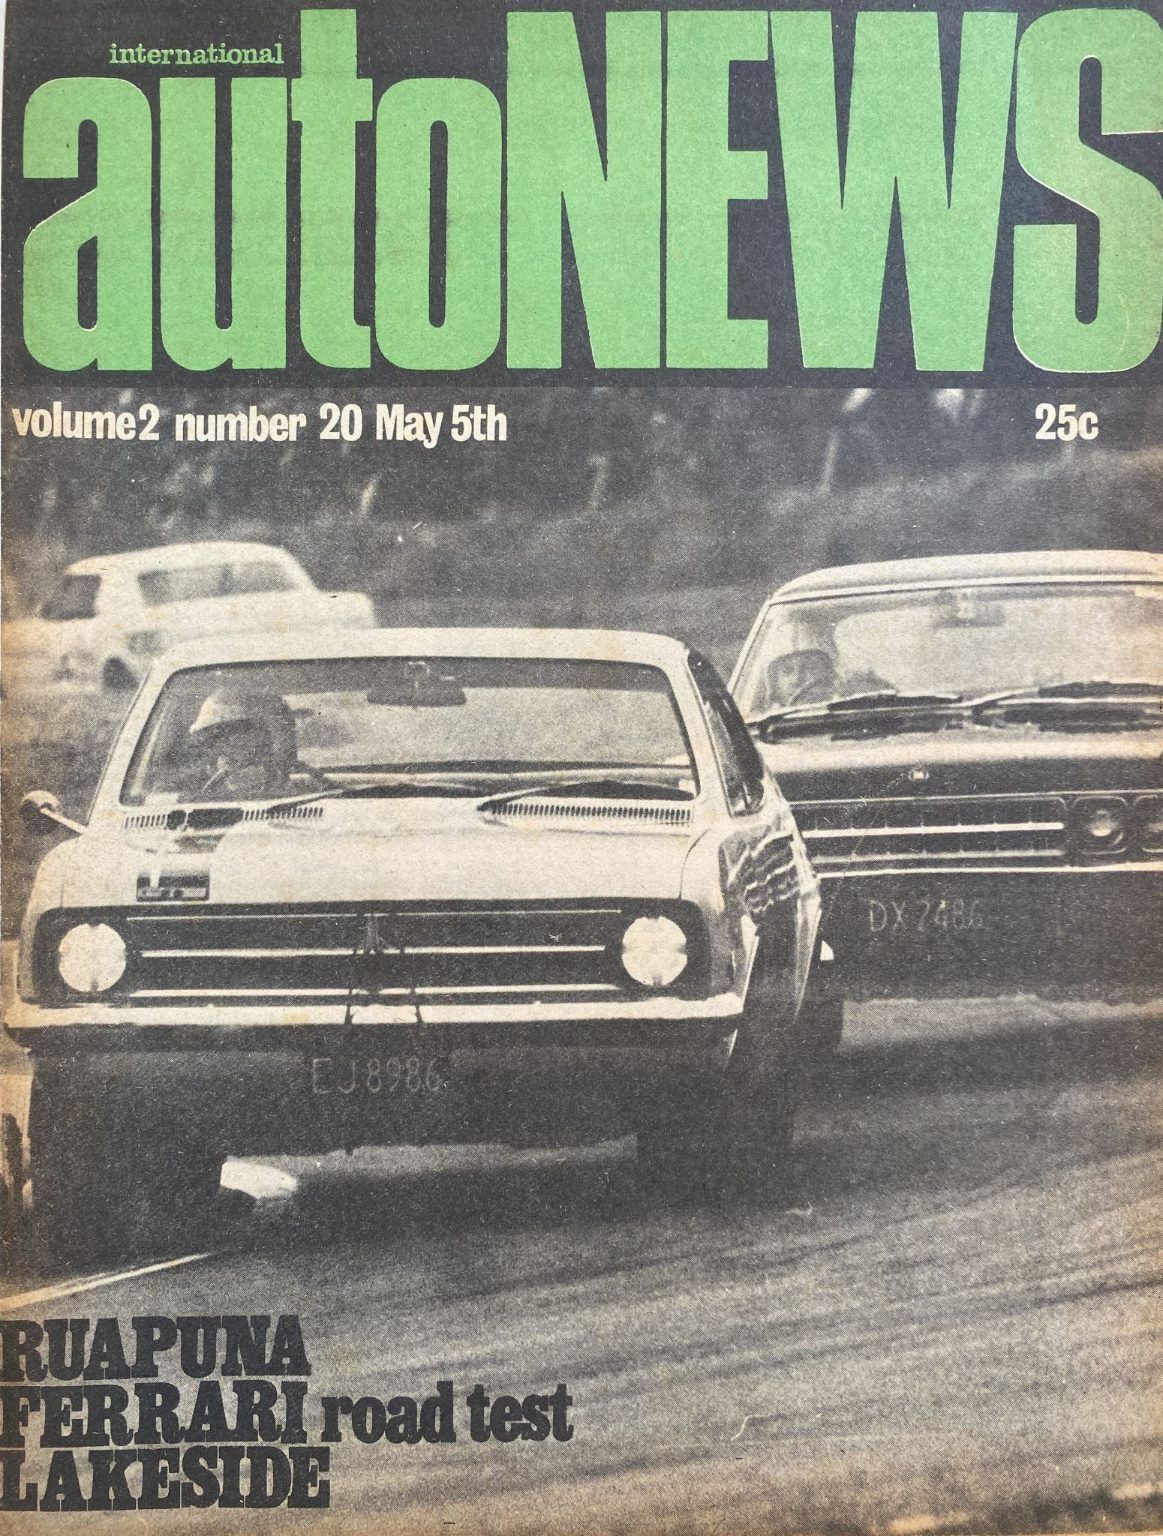 OLD MAGAZINE: International Auto News - Vol. 2, Number 20, 5th May 1969